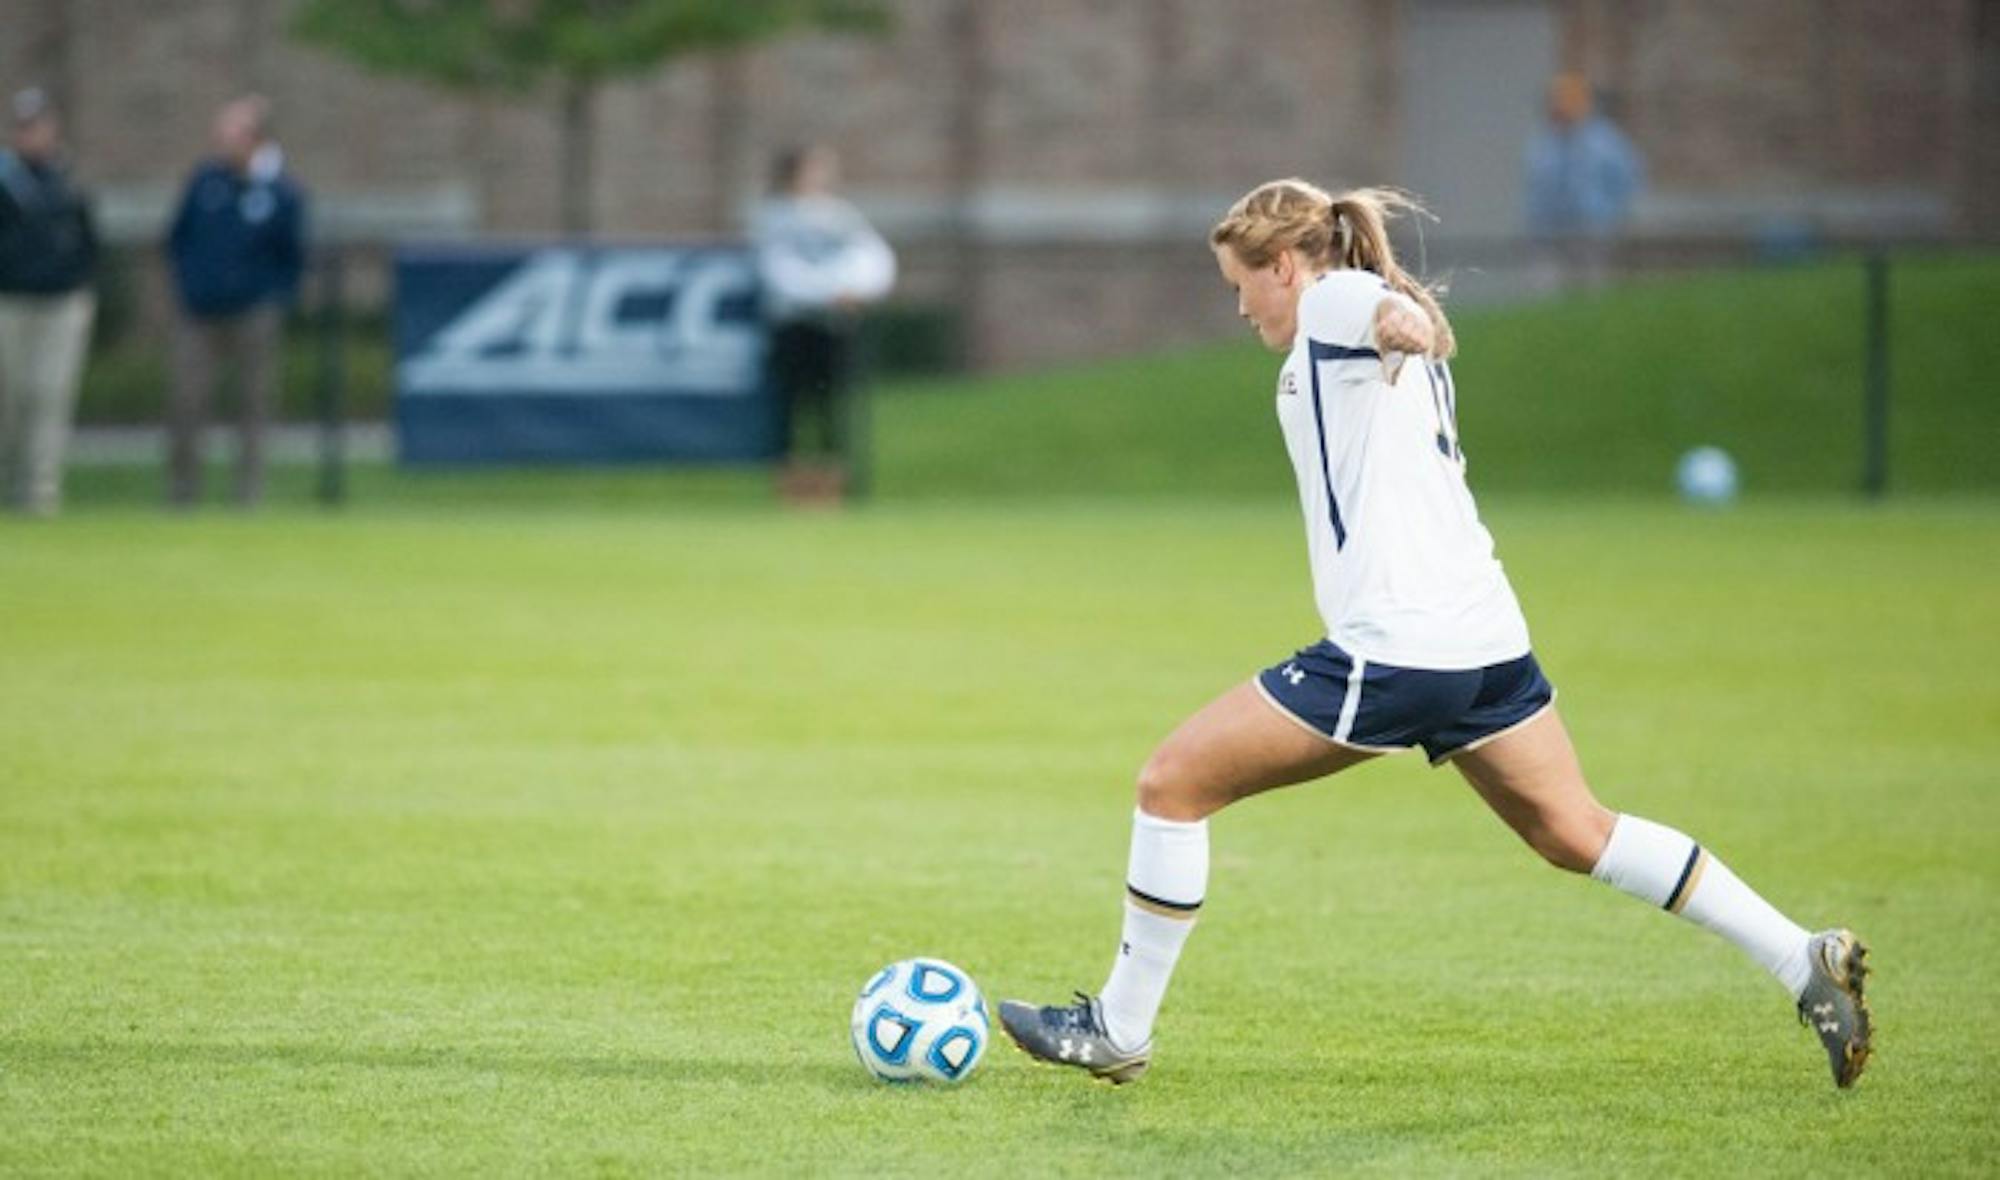 rish senior defender Sammy Scofield launches a kick in Notre Dame’s 1-0 win against Baylor on Sept. 12 at Alumni Stadium. Scofield and the No. 14 Irish face No. 4 Virginia on Sunday at home.